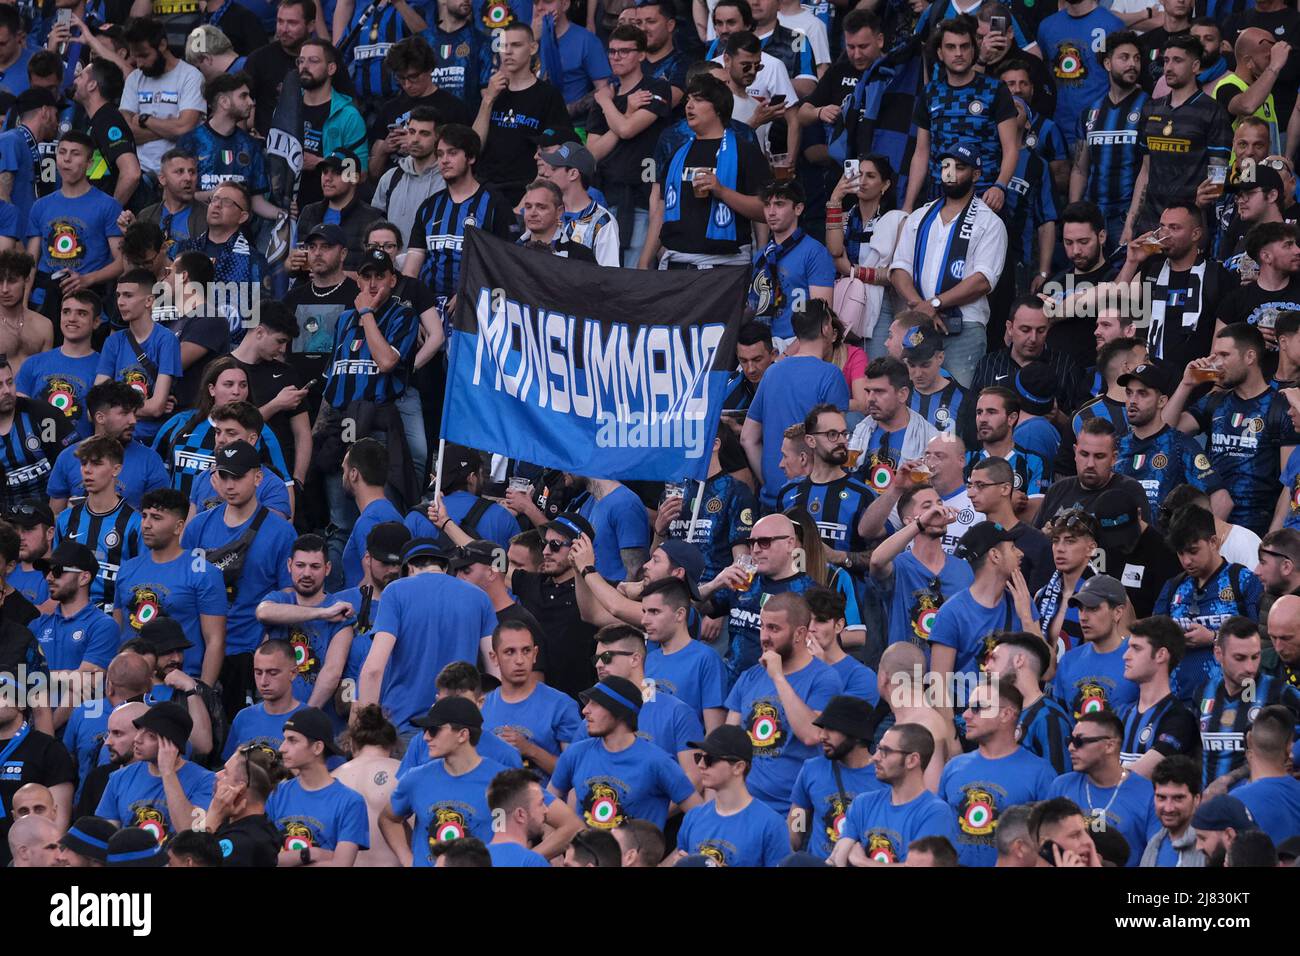 Supporters Inter during the Coppa Italia final between Juventus Vs Inter at the Olimpico Stadium Rome, centre Italy, on May 11, 2022. Stock Photo